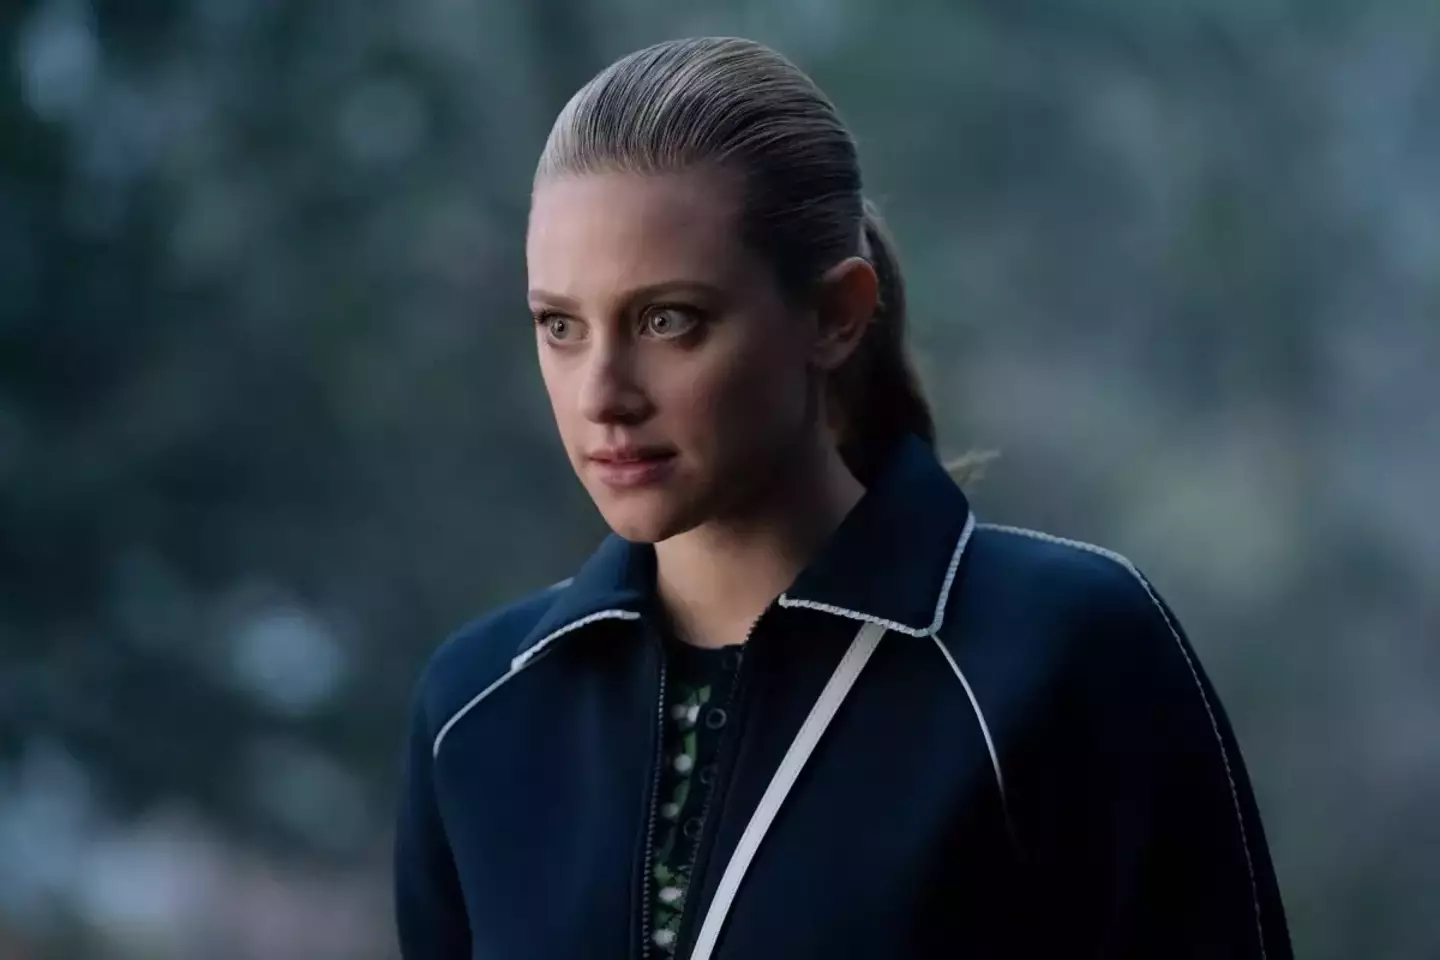 Betty is the last remaining member of the Riverdale gang.